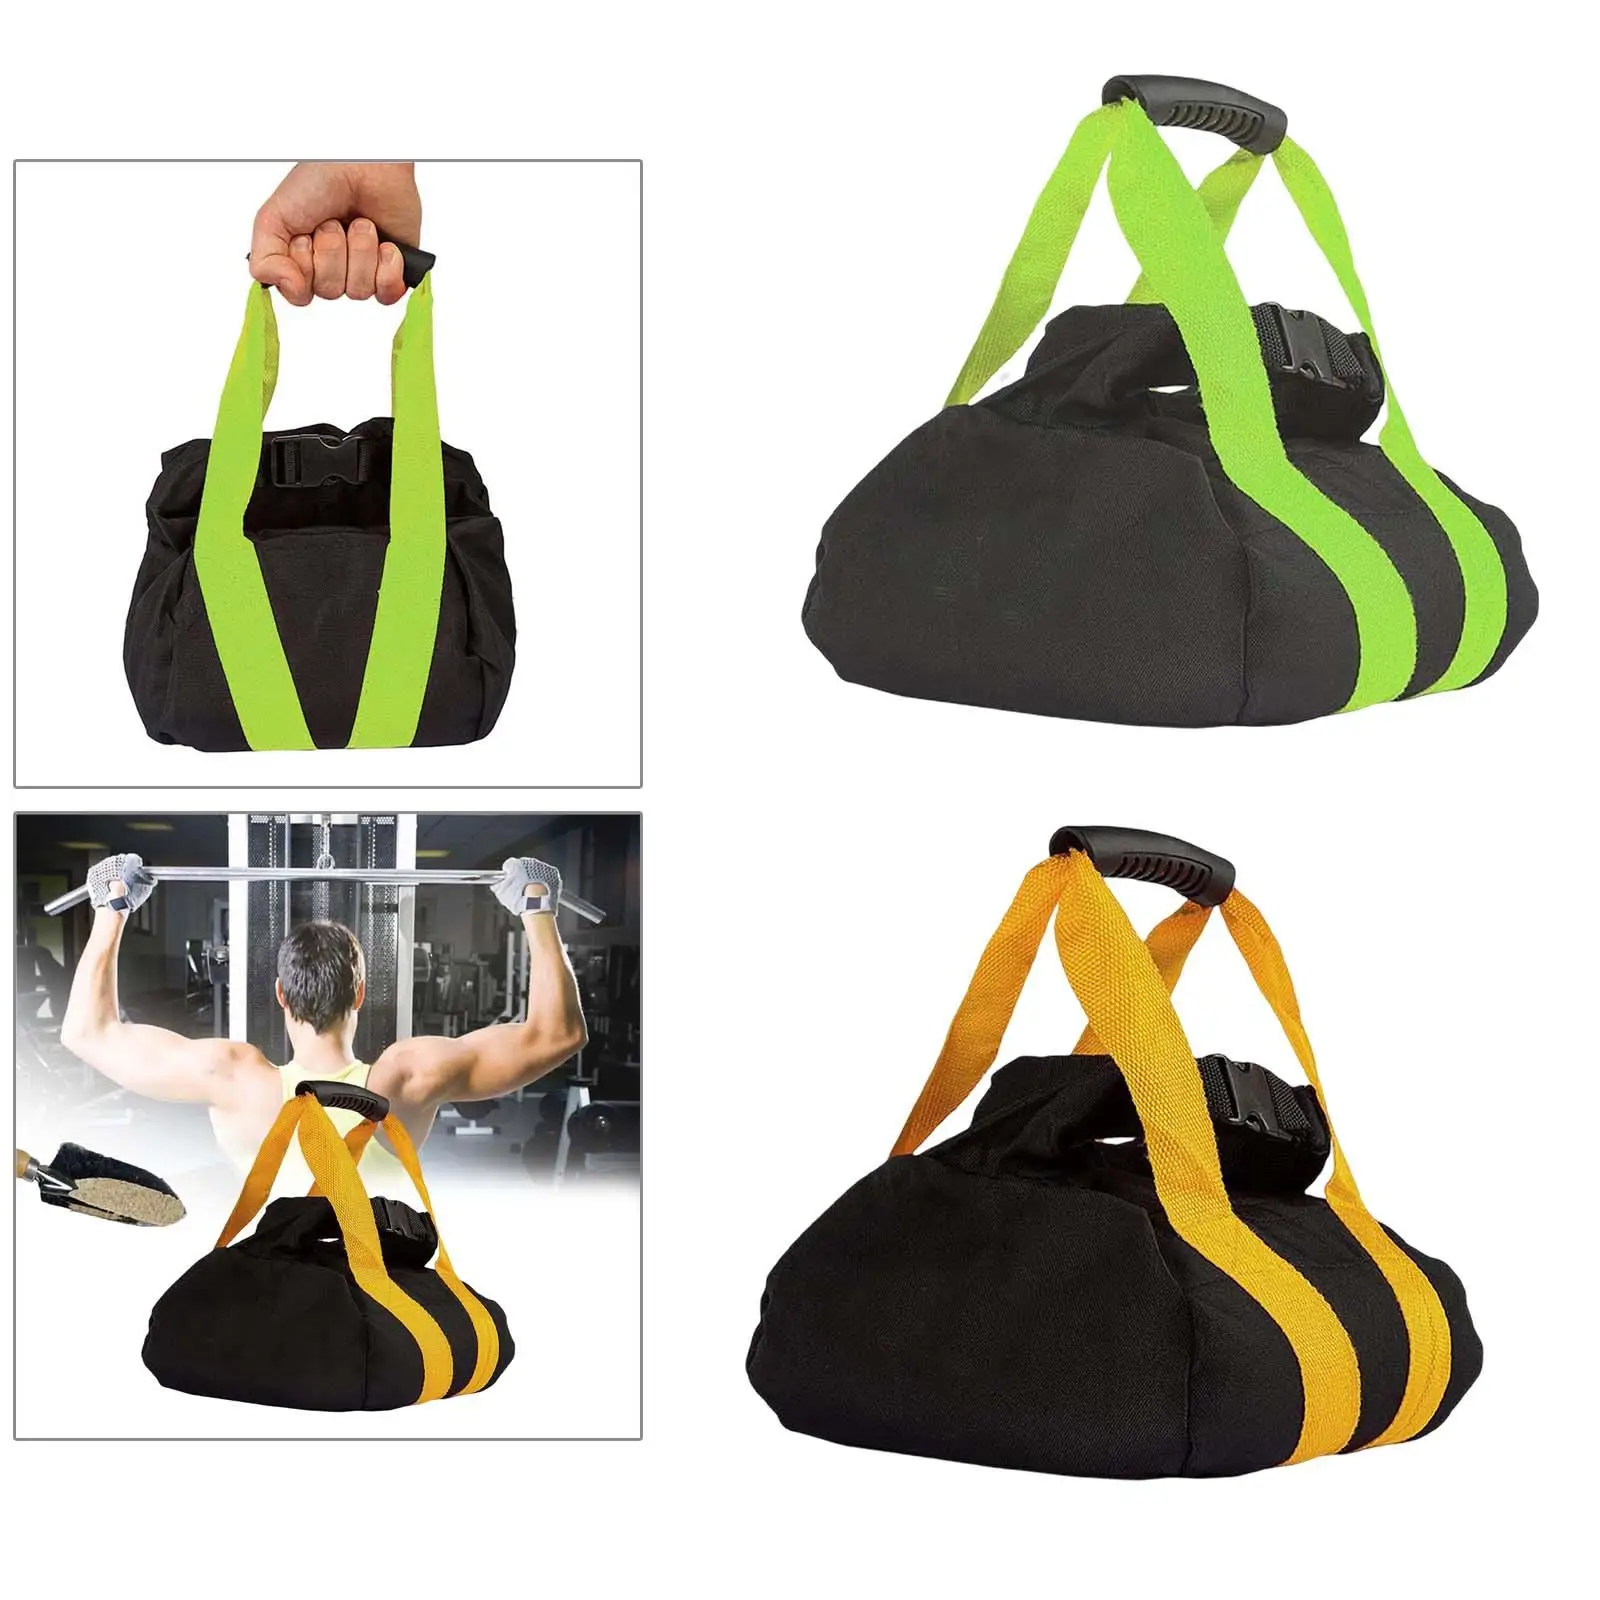 Empty Weight Sand Bag Bodybuilding Fitness Equipment Strength Training Portable